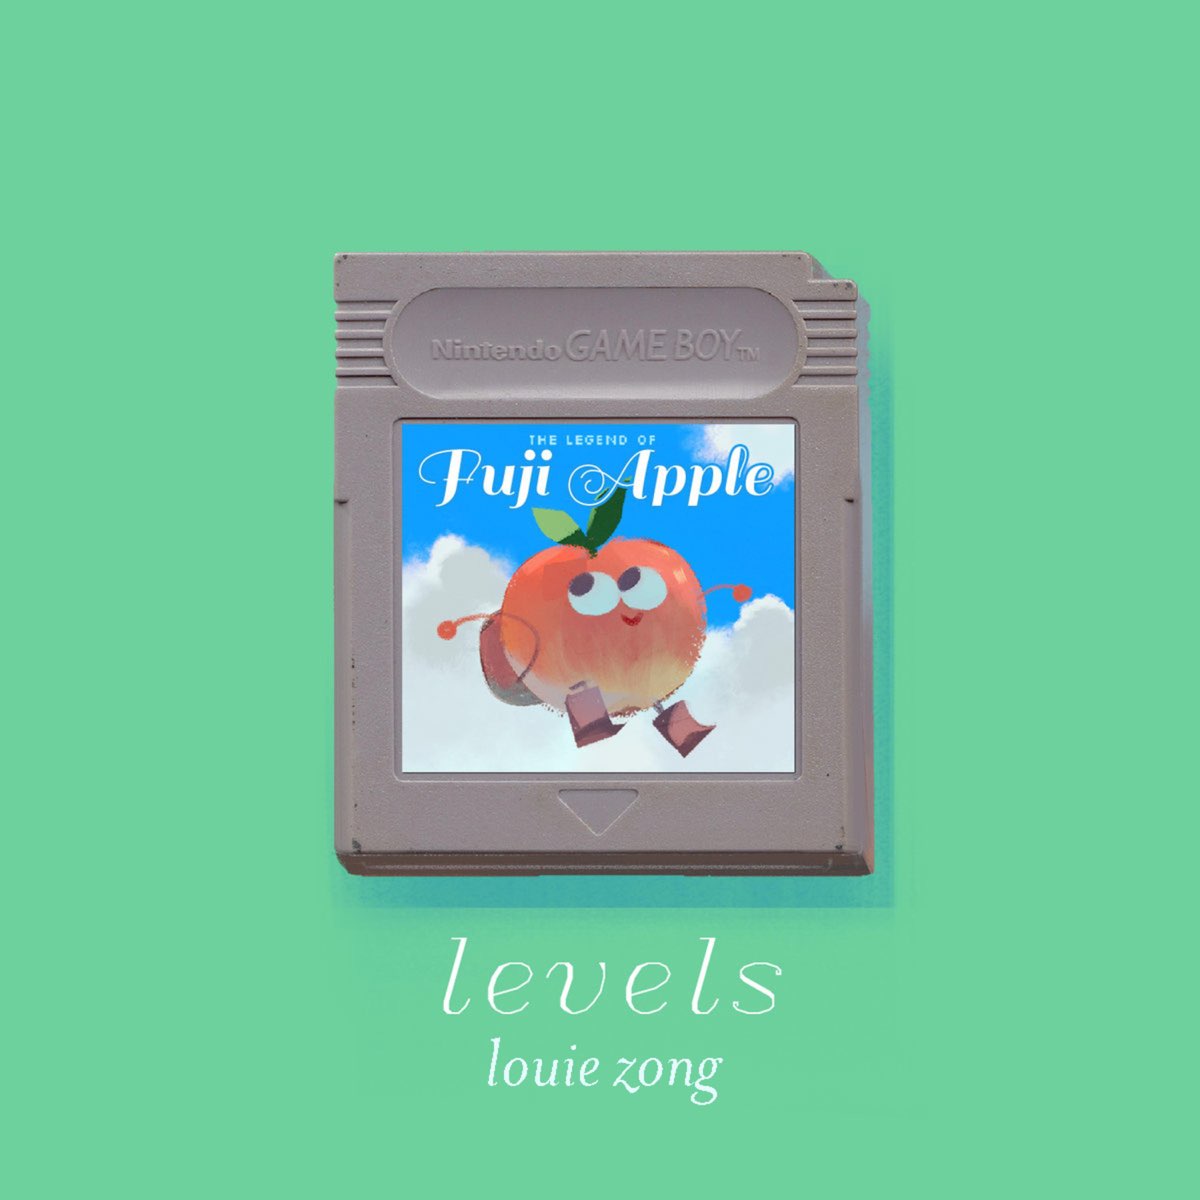 Levels by Louie Zong on Apple Music